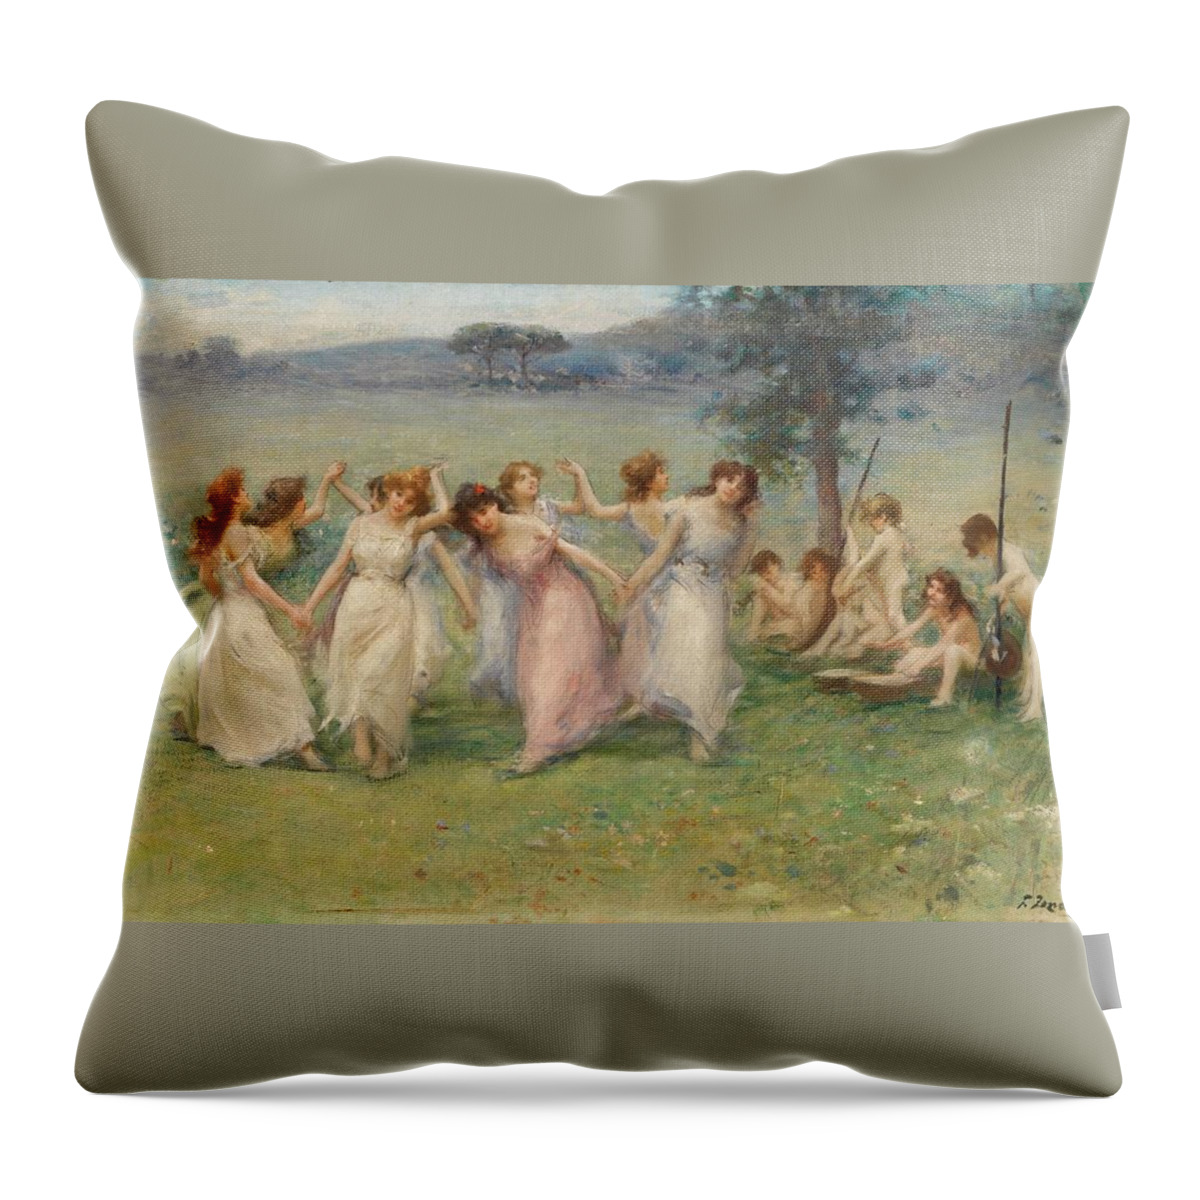 Fausto Zonaro 1854 - 1929 Italian Allegory Of Spring Throw Pillow featuring the painting Italian Allegory Of Spring by MotionAge Designs